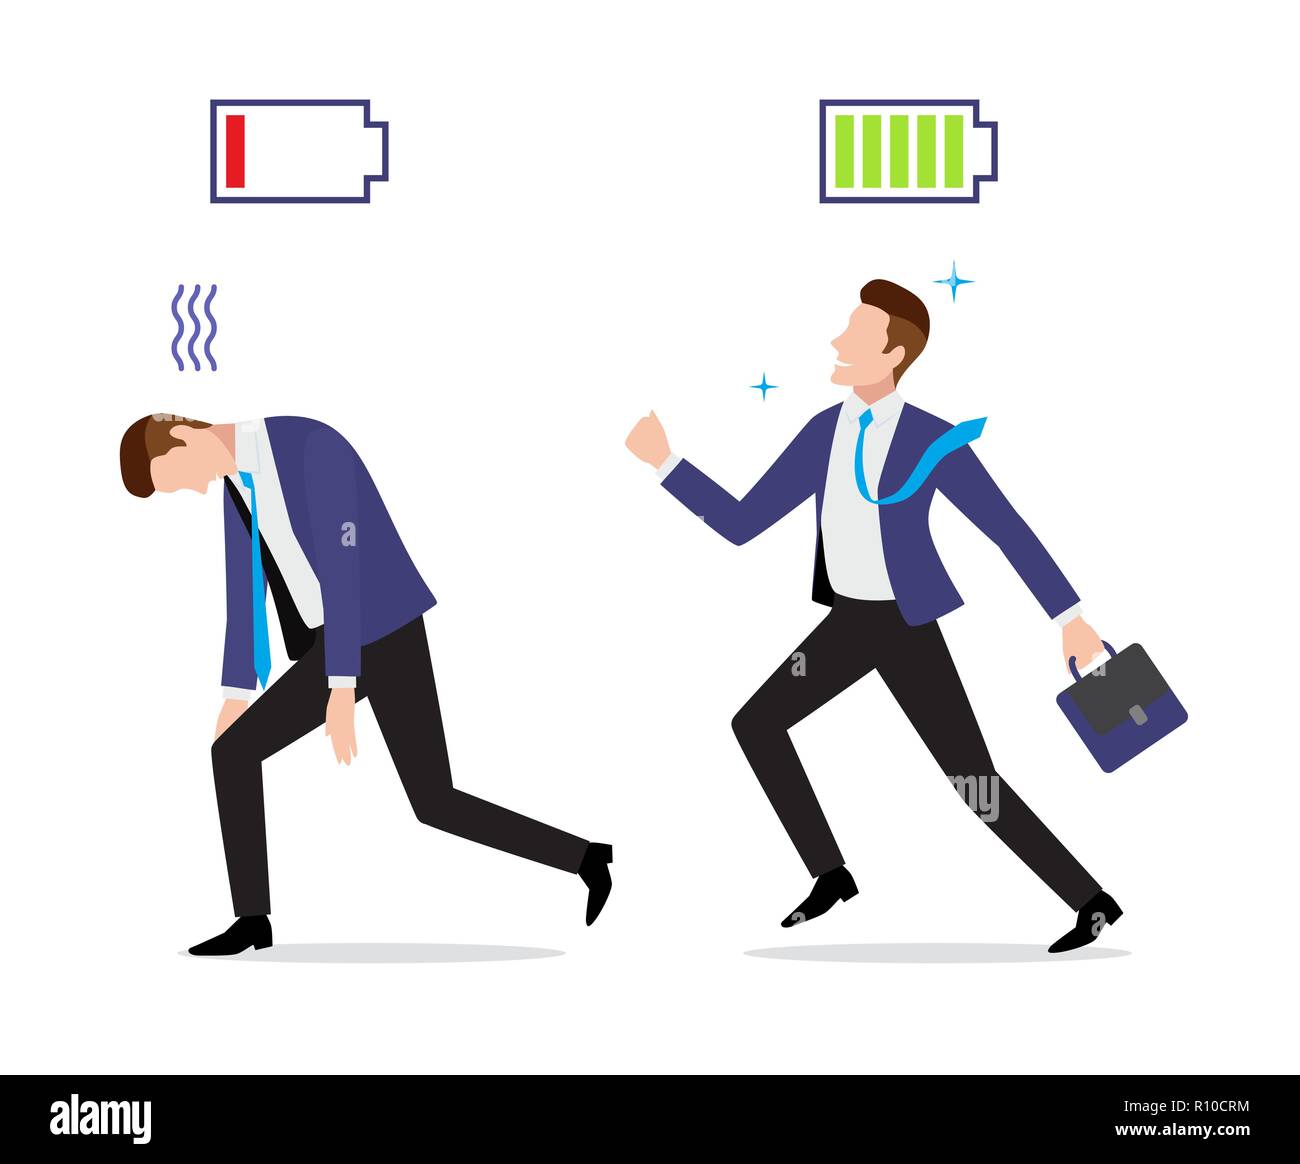 Stressed overworked and vigorous businessman with charged and discharged battery icon Stock Vector